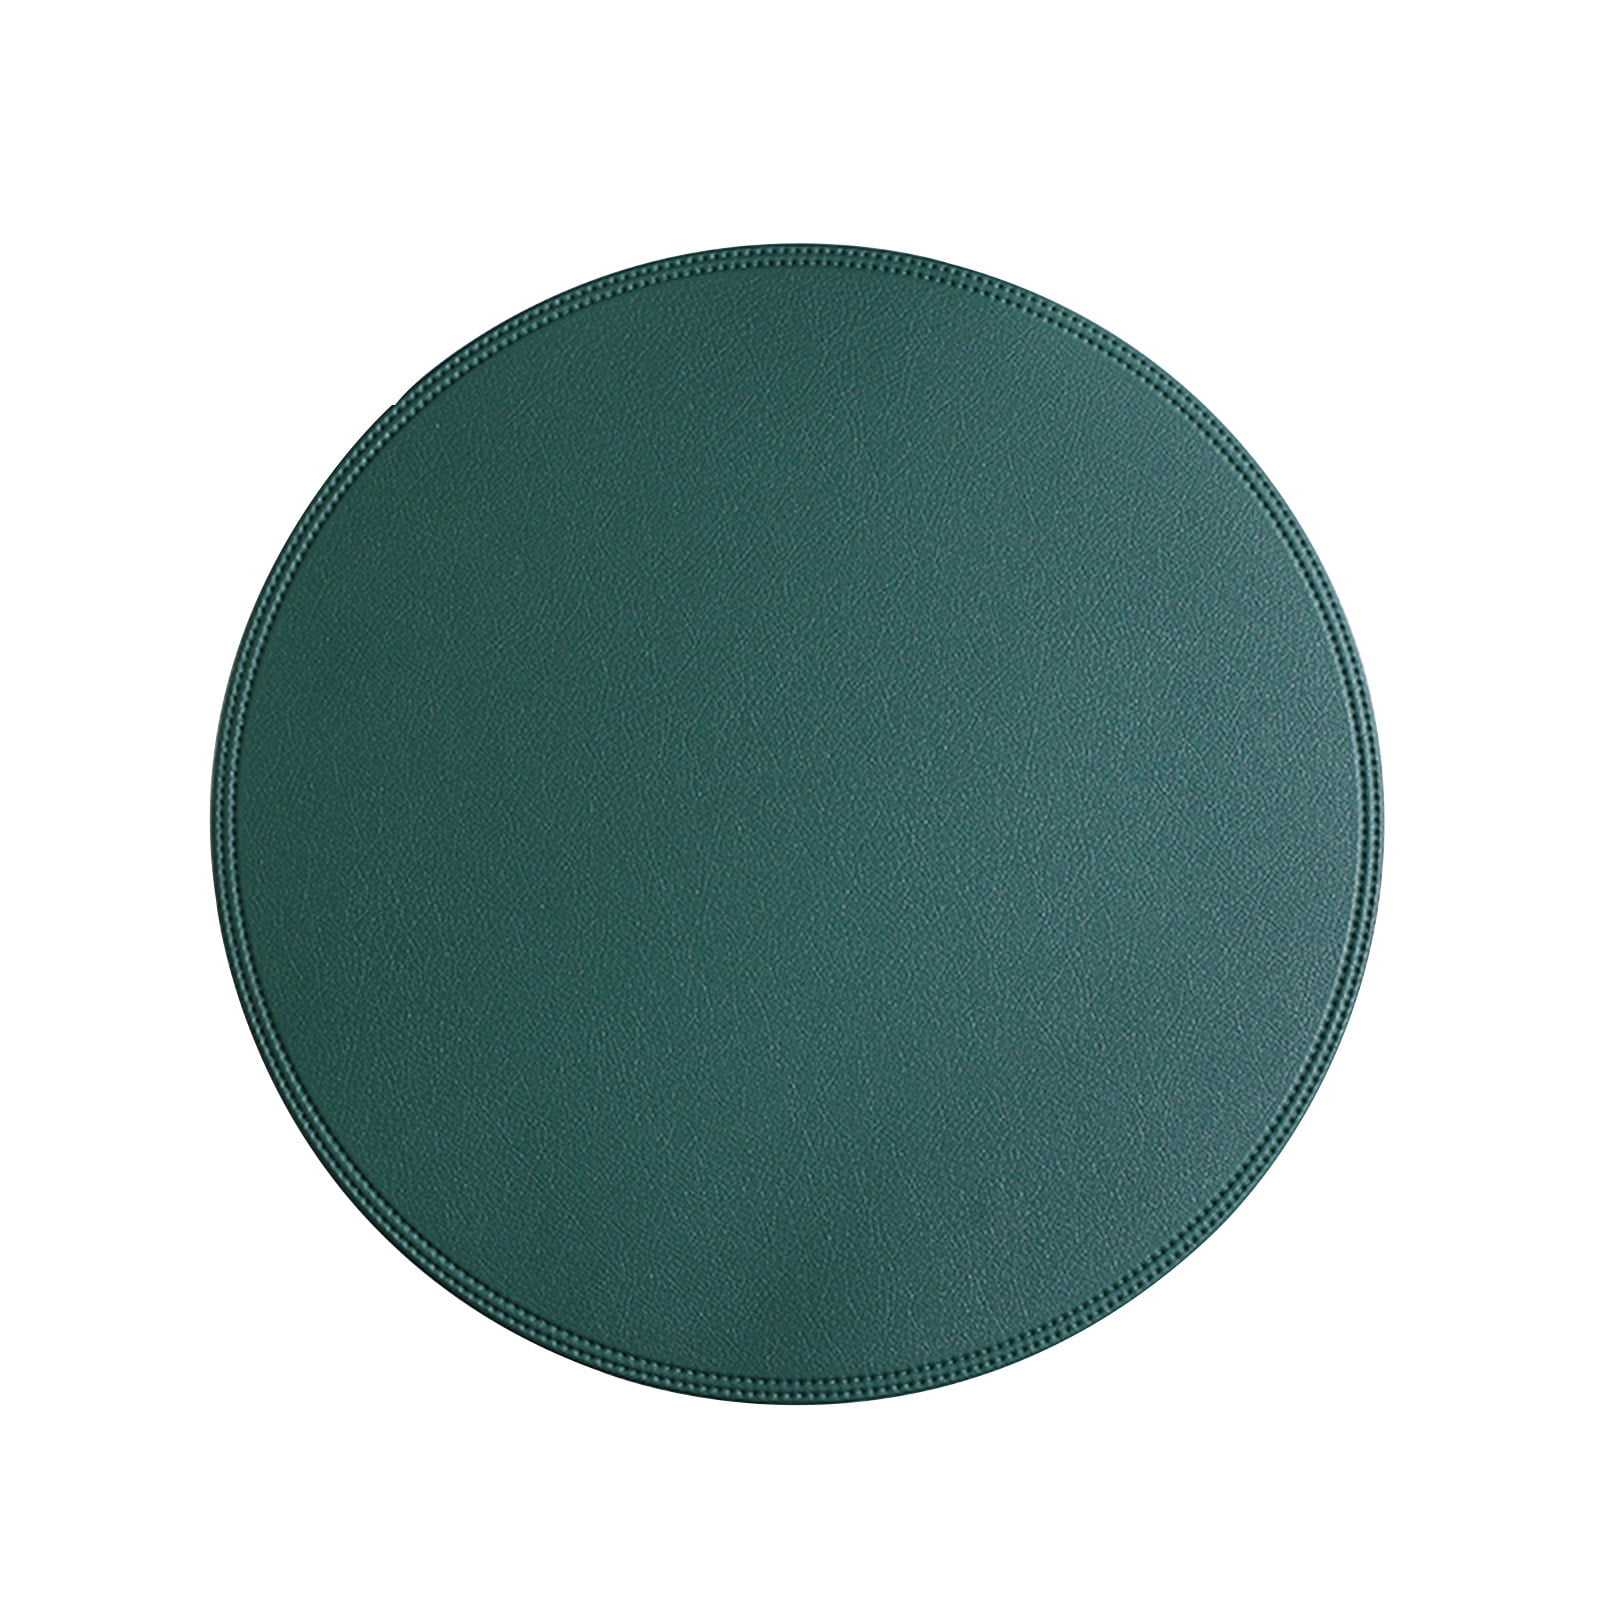 Clearance!lulshou Round Leather Placemat Solid Colour Faux Leather Placemats , Coffee Mats, Kitchen Table Mats, Waterproof, Easy to CleanKitchen Table